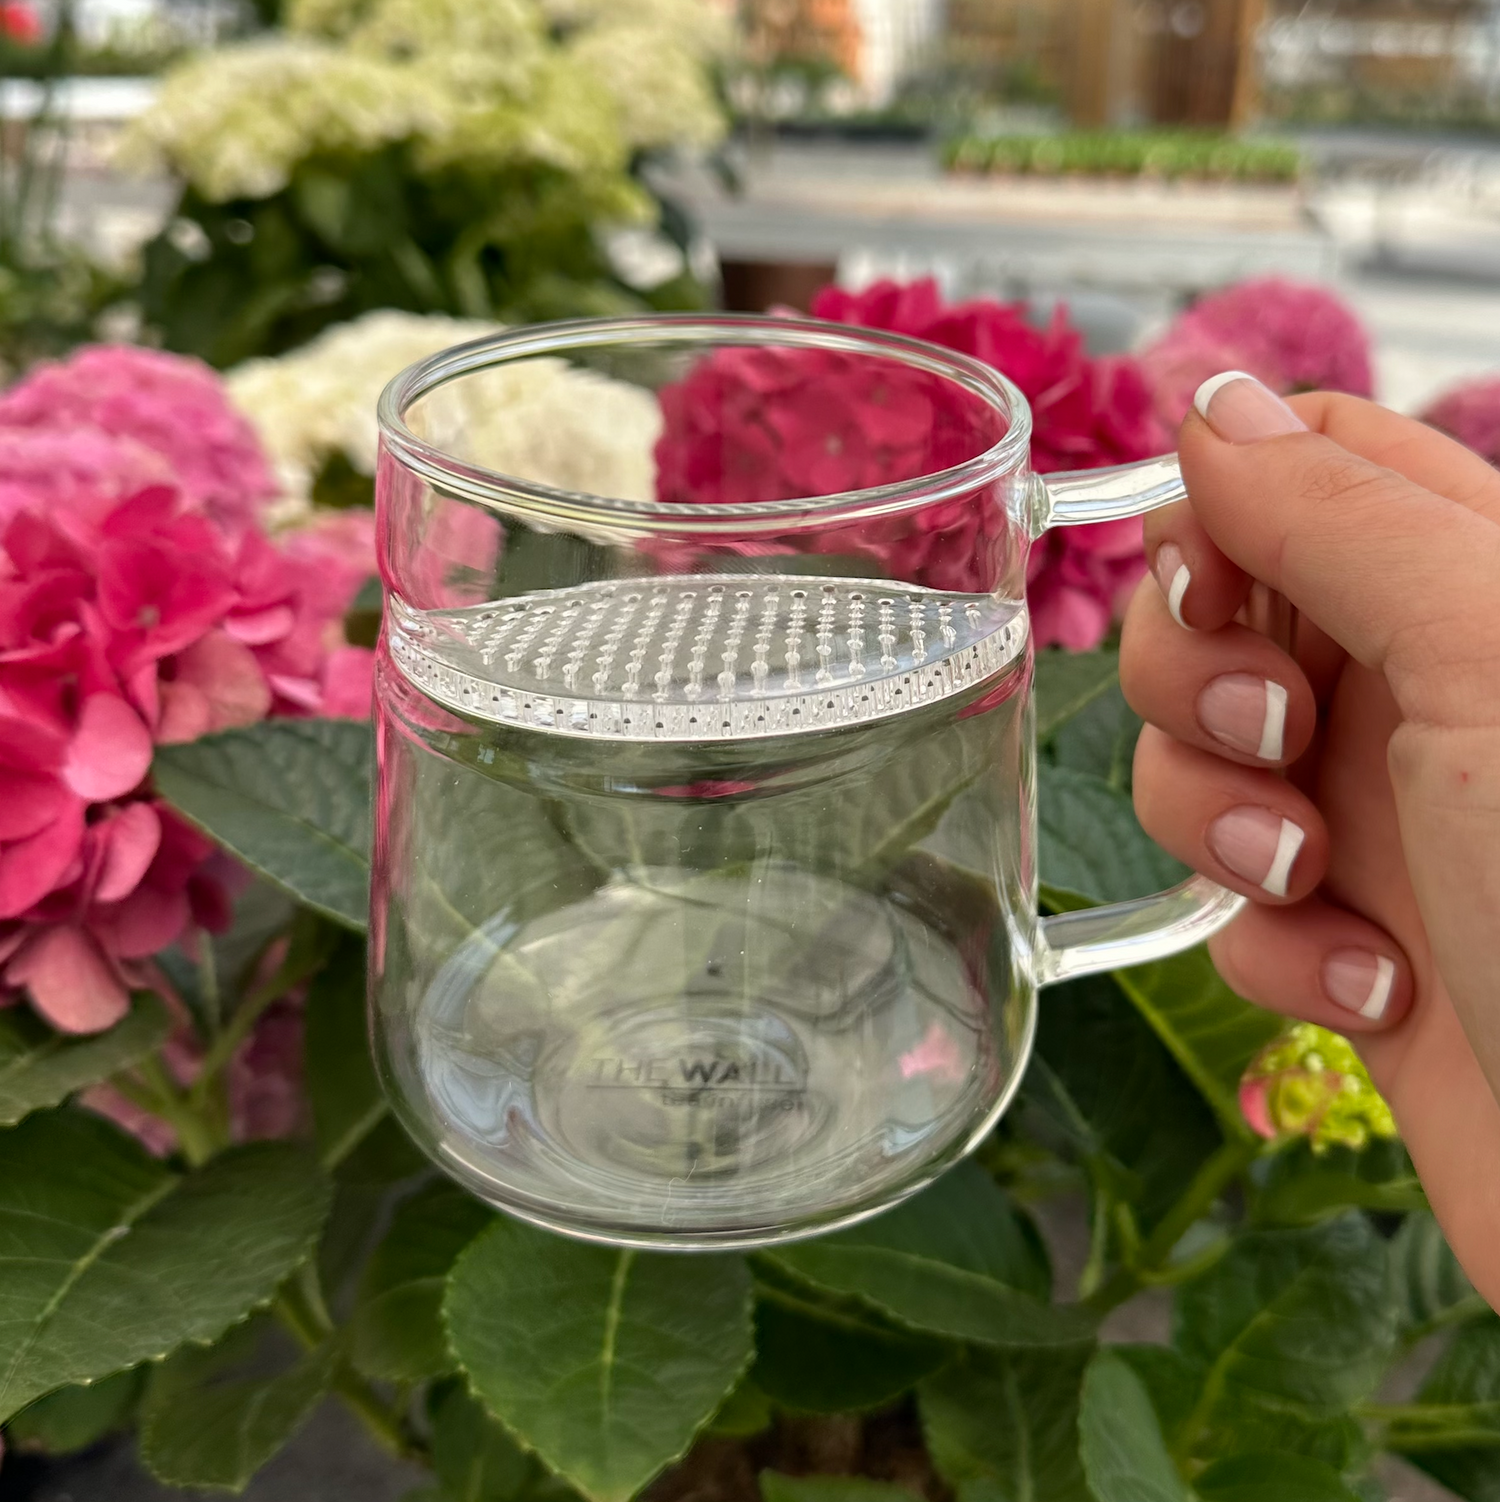 The WALL Glass Tea Infuser